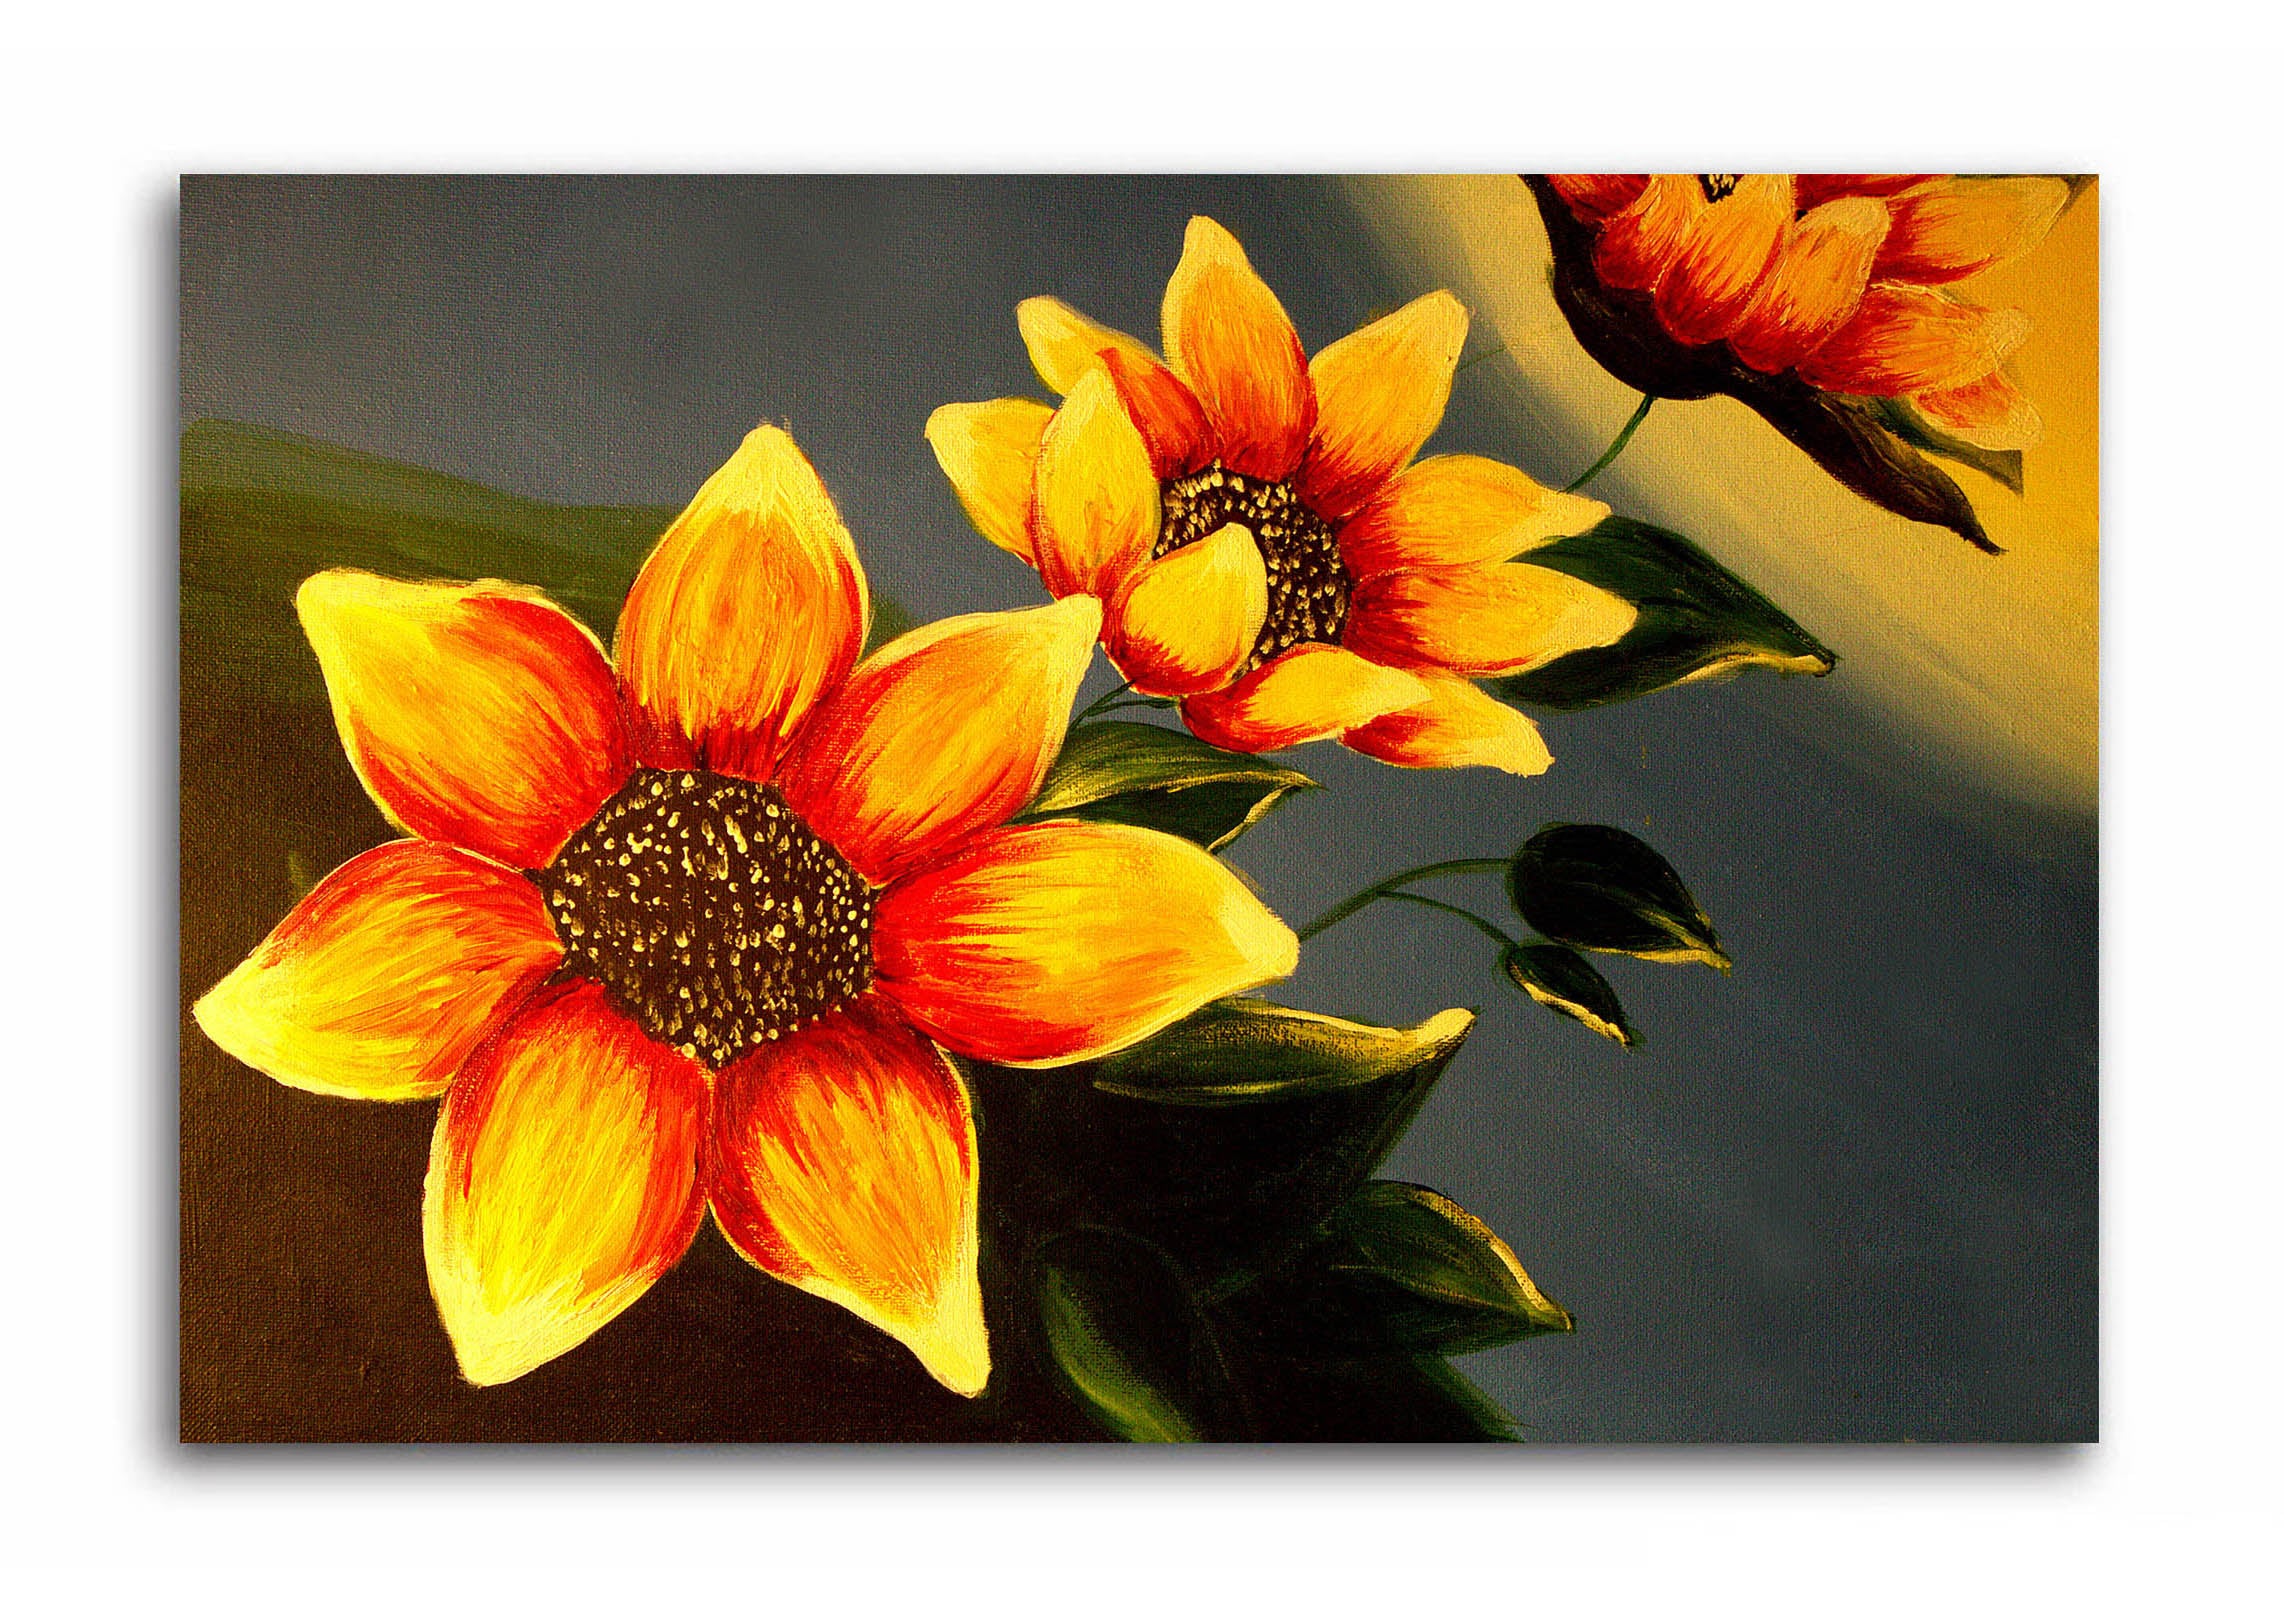 Sunflowers - Unframed Canvas Painting